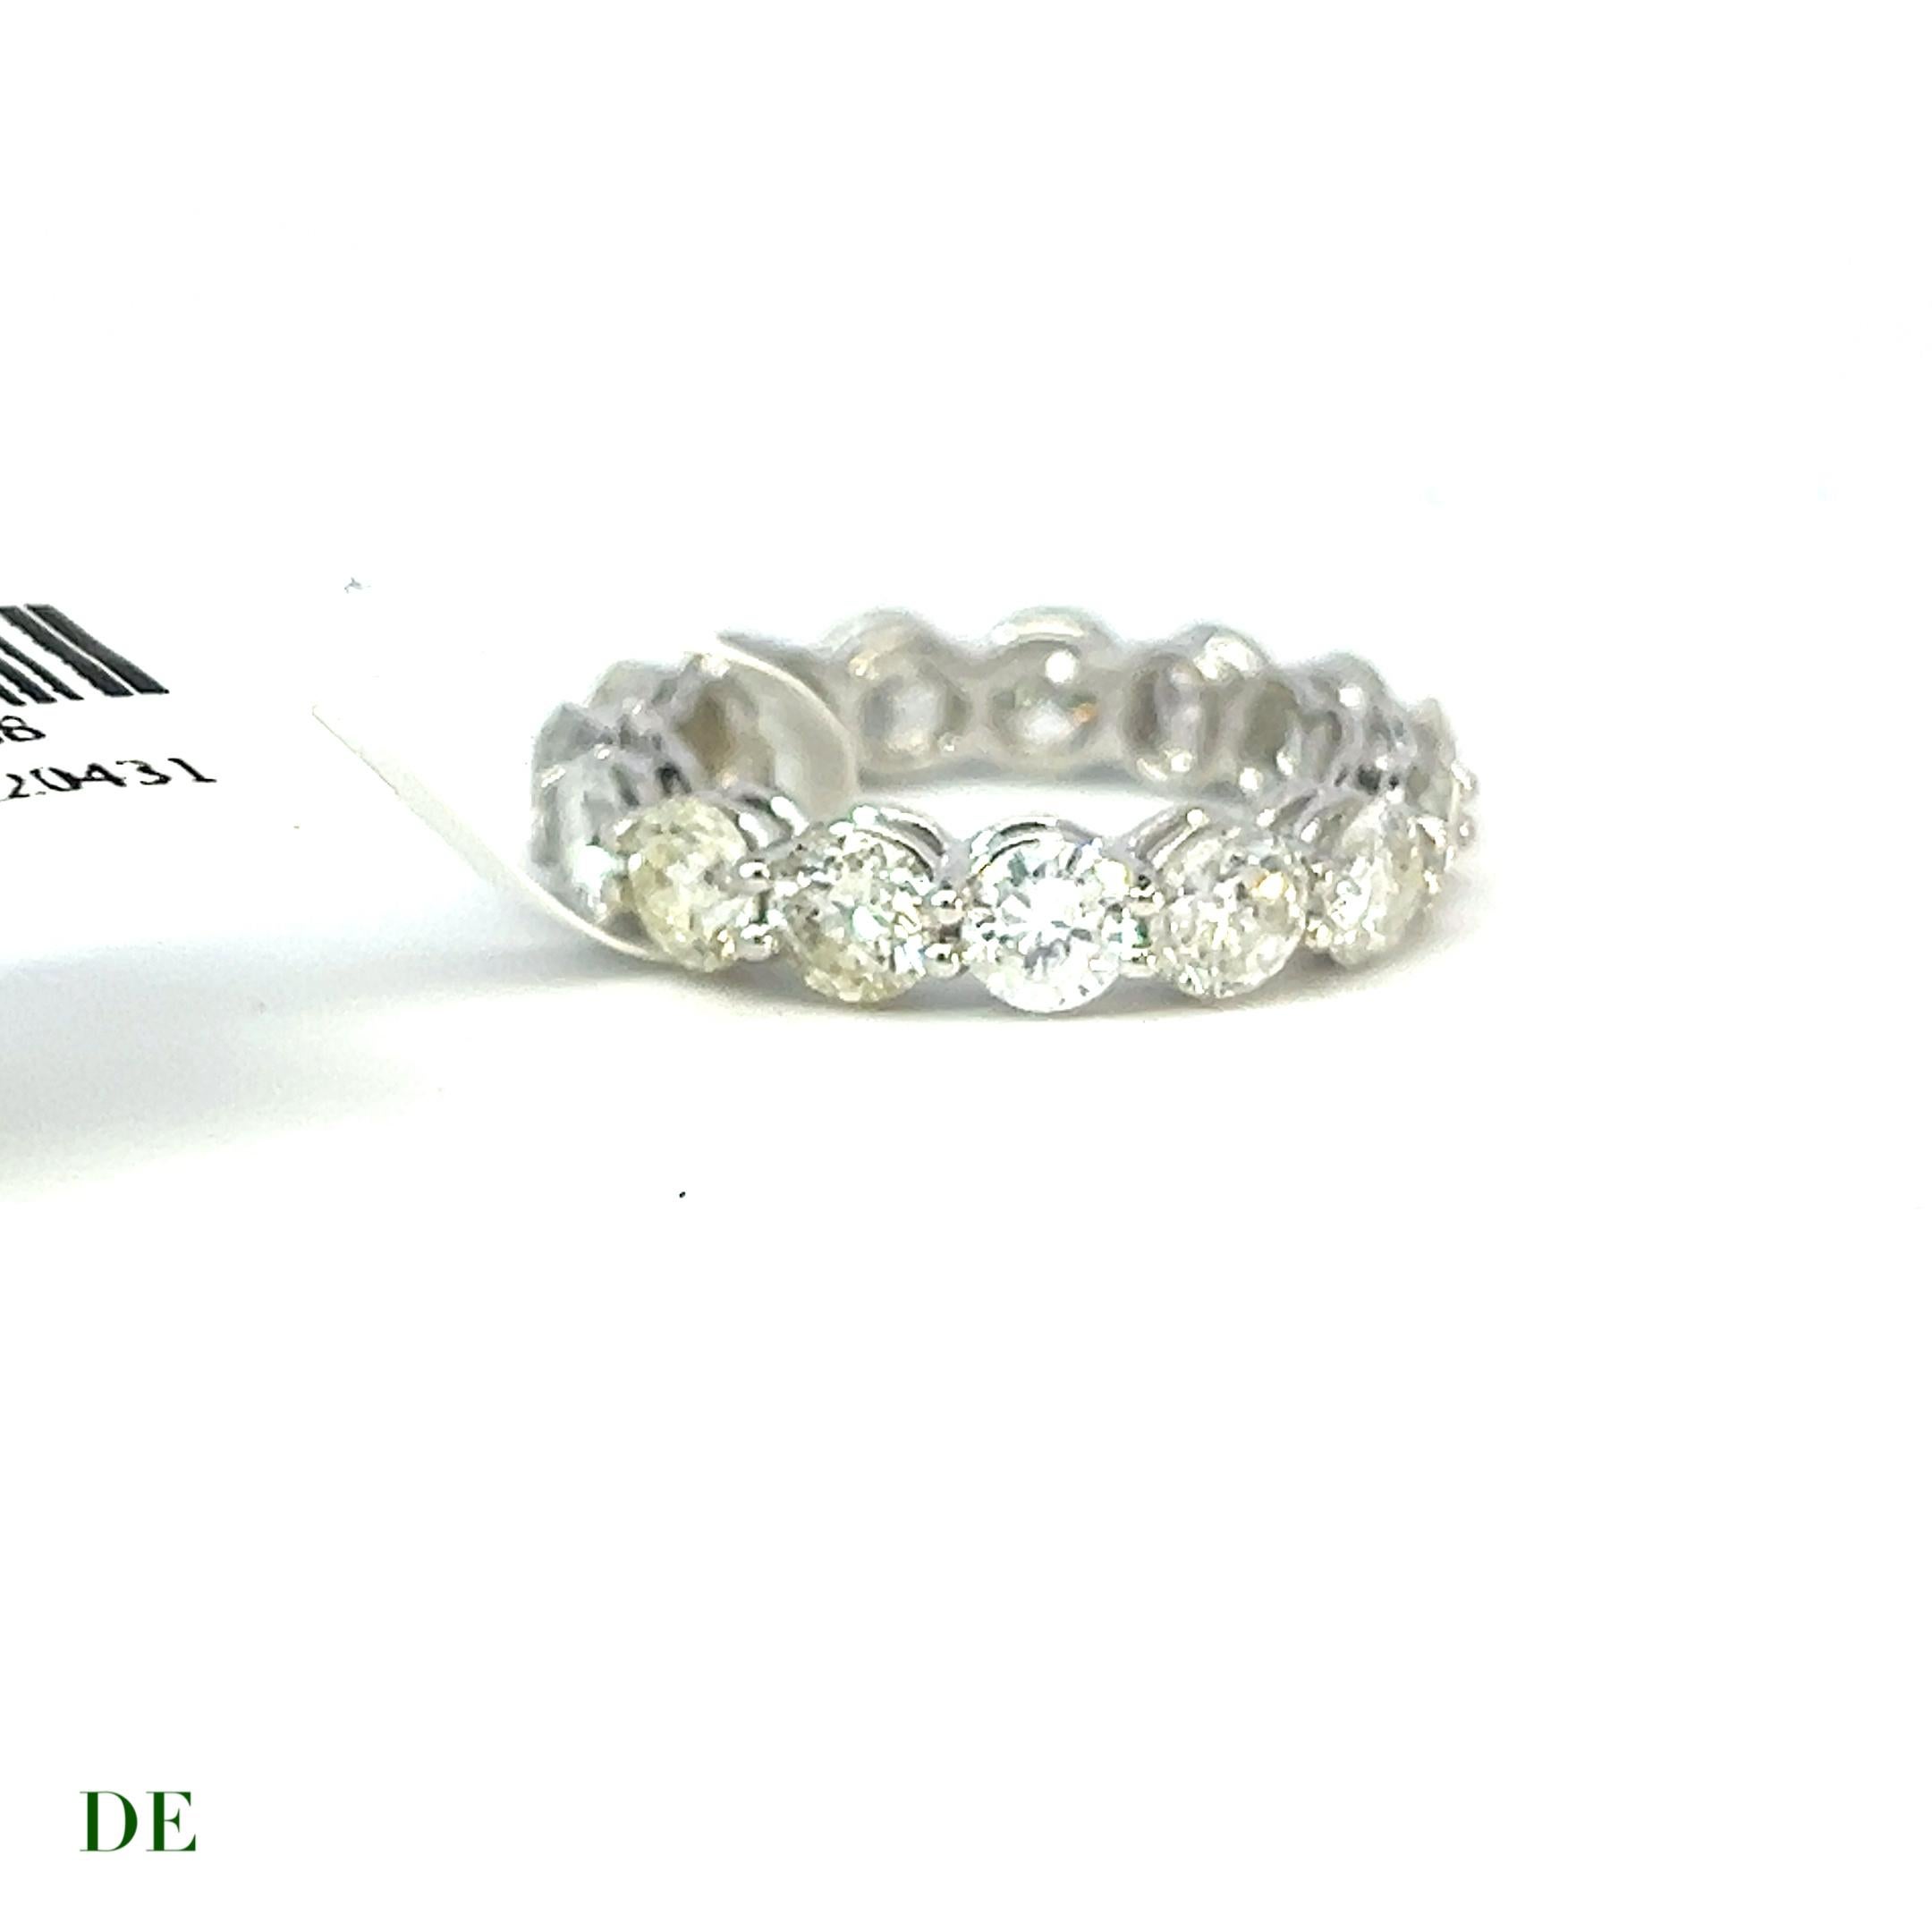 Classic 14k Gold 4.15 Carat Elegant Eternity Band Diamond Ring

Introducing the Classic 14k Gold 4.15 Carat Elegant Eternity Band Diamond Ring, a true masterpiece of luxury and brilliance. This extraordinary ring is designed to captivate hearts and